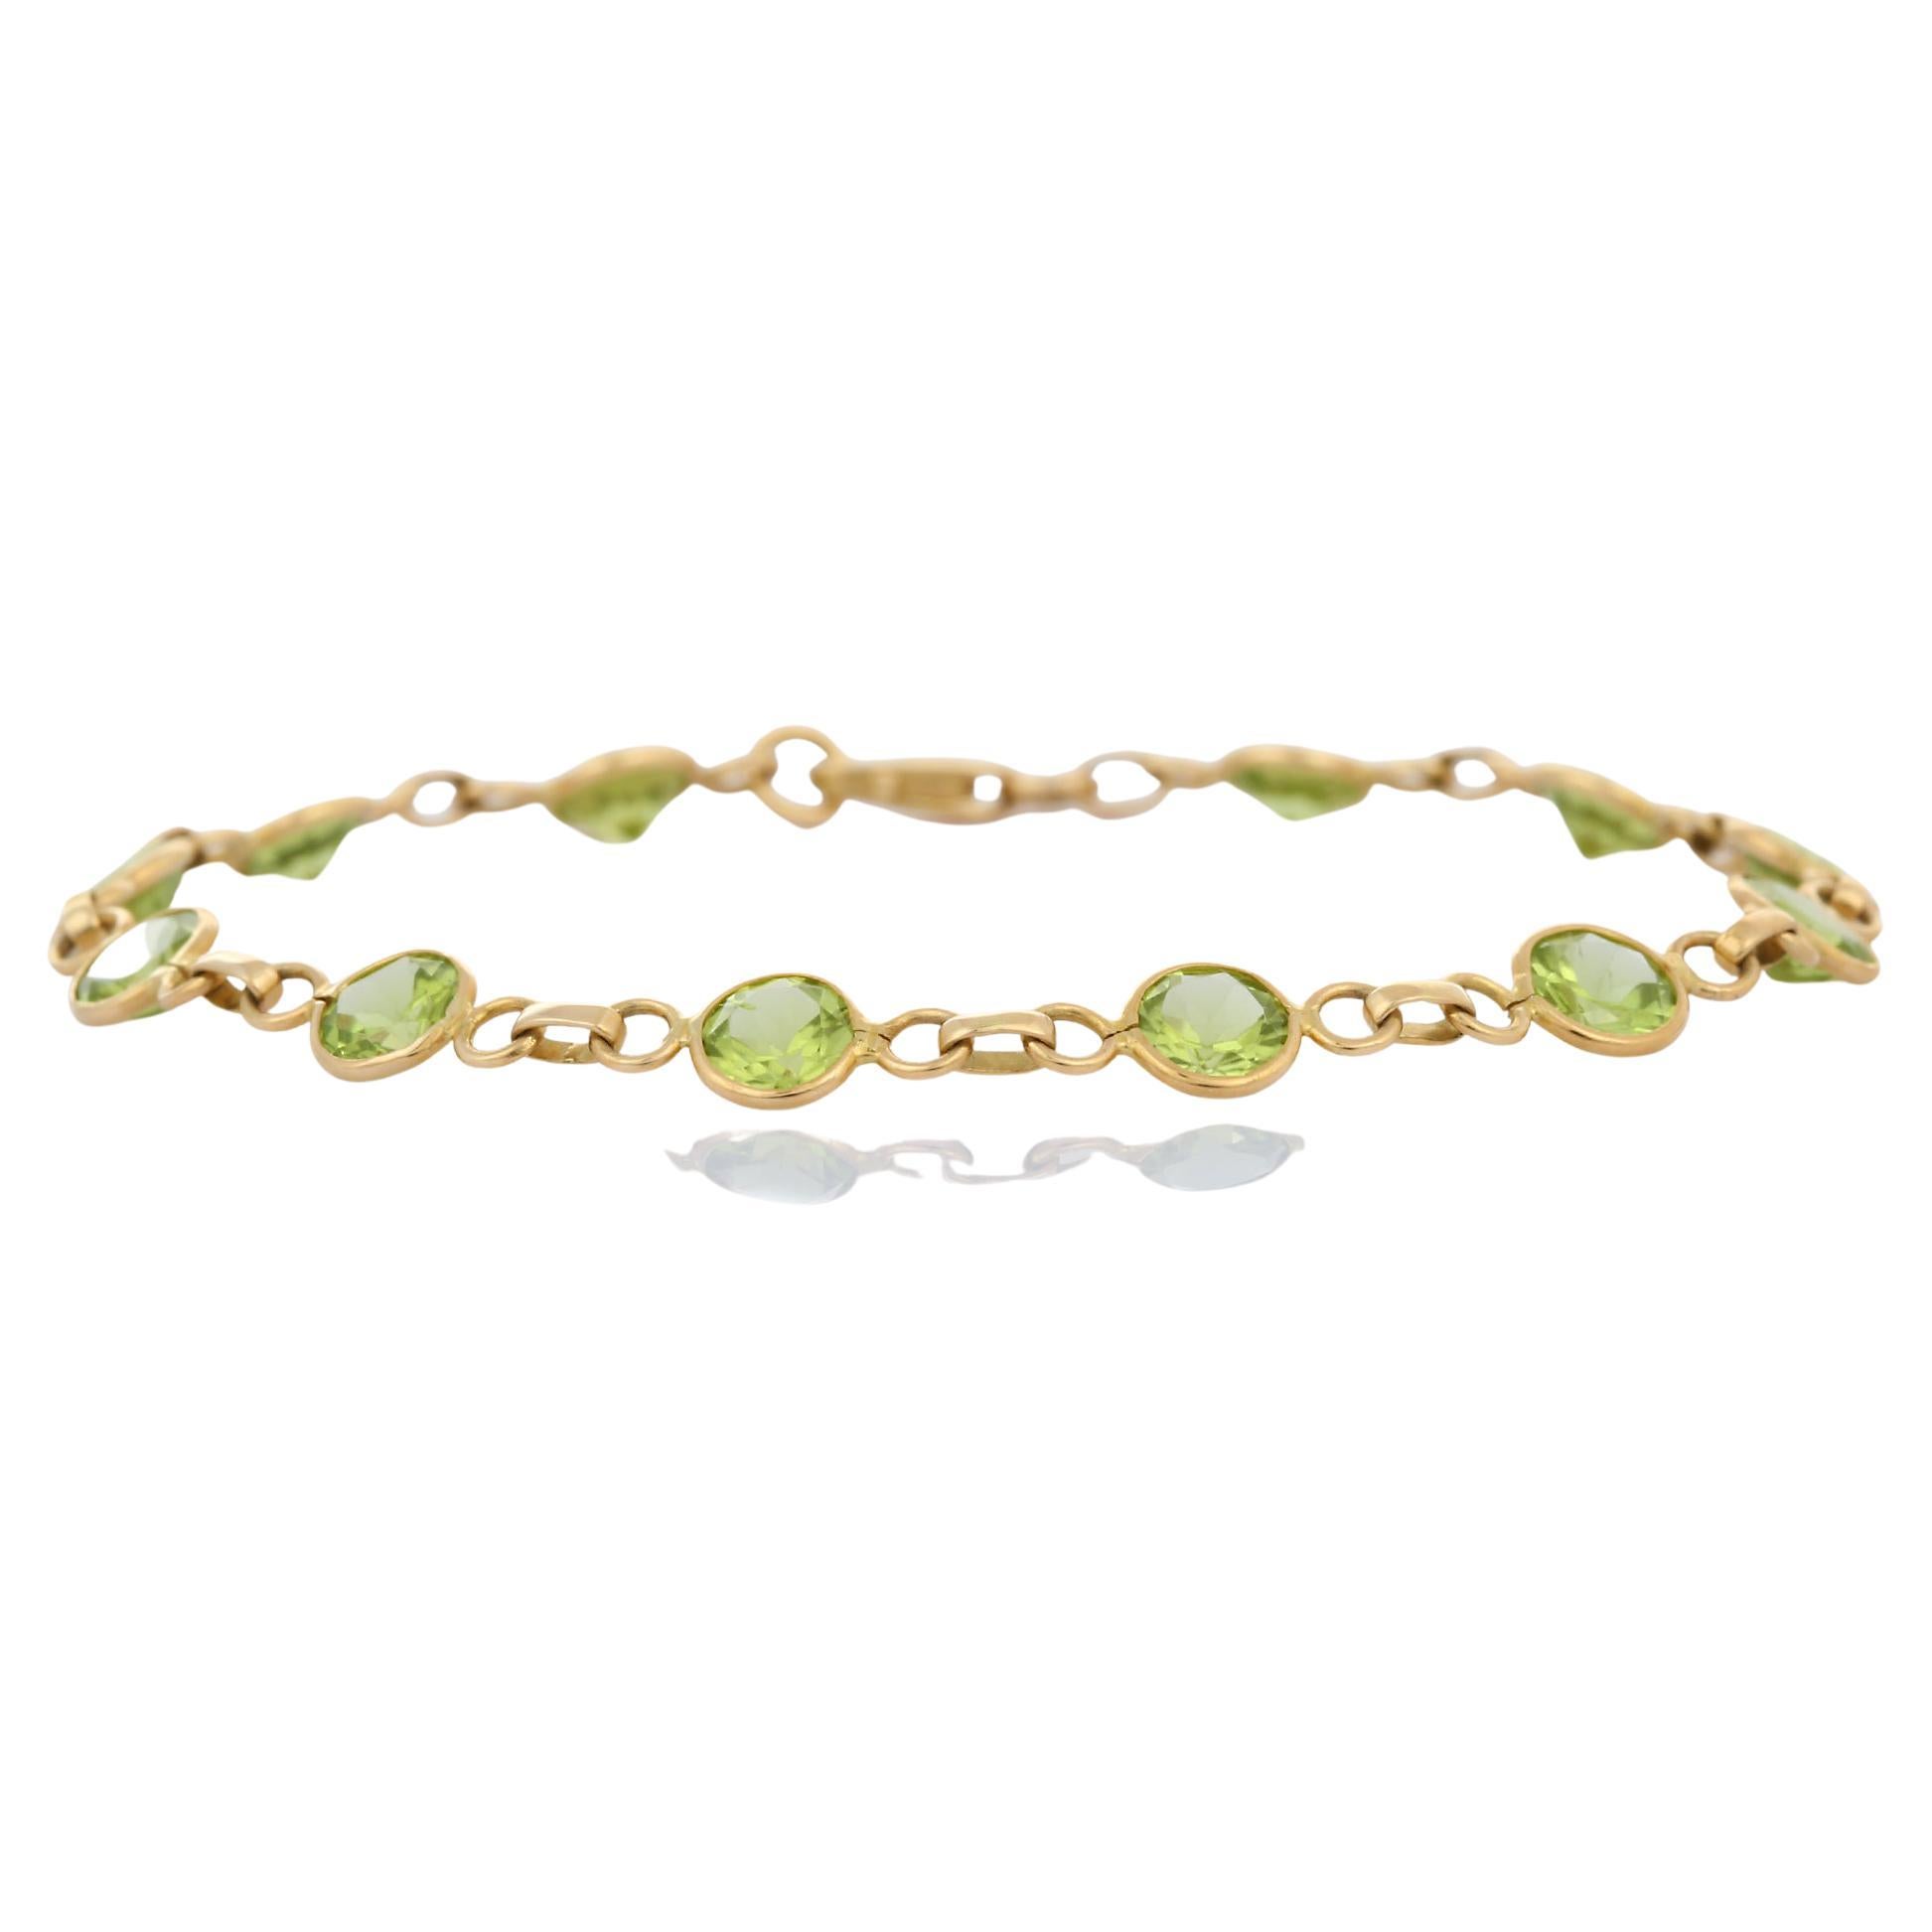 This Peridot Linking Chain Bracelet in 18K gold showcases 12 endlessly sparkling natural peridot, weighing 5.85 carats. It measures 7 inches long in length. 
Peridot attracts love and calms anger by giving renewal to all things.
Designed with twelve